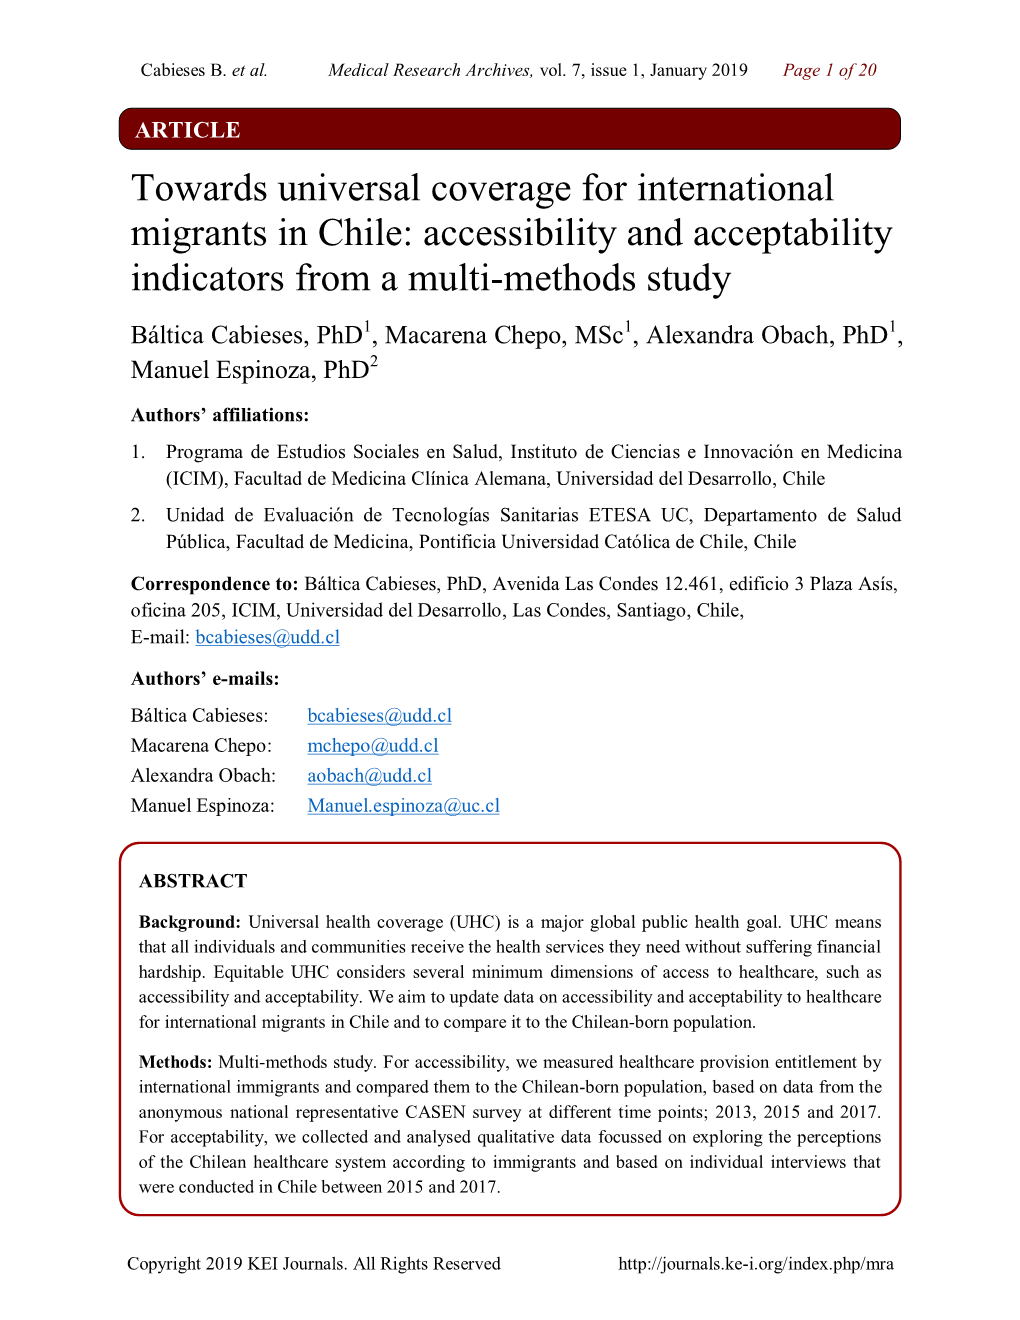 Towards Universal Coverage for International Migrants in Chile: Accessibility and Acceptability Indicators from a Multi-Methods